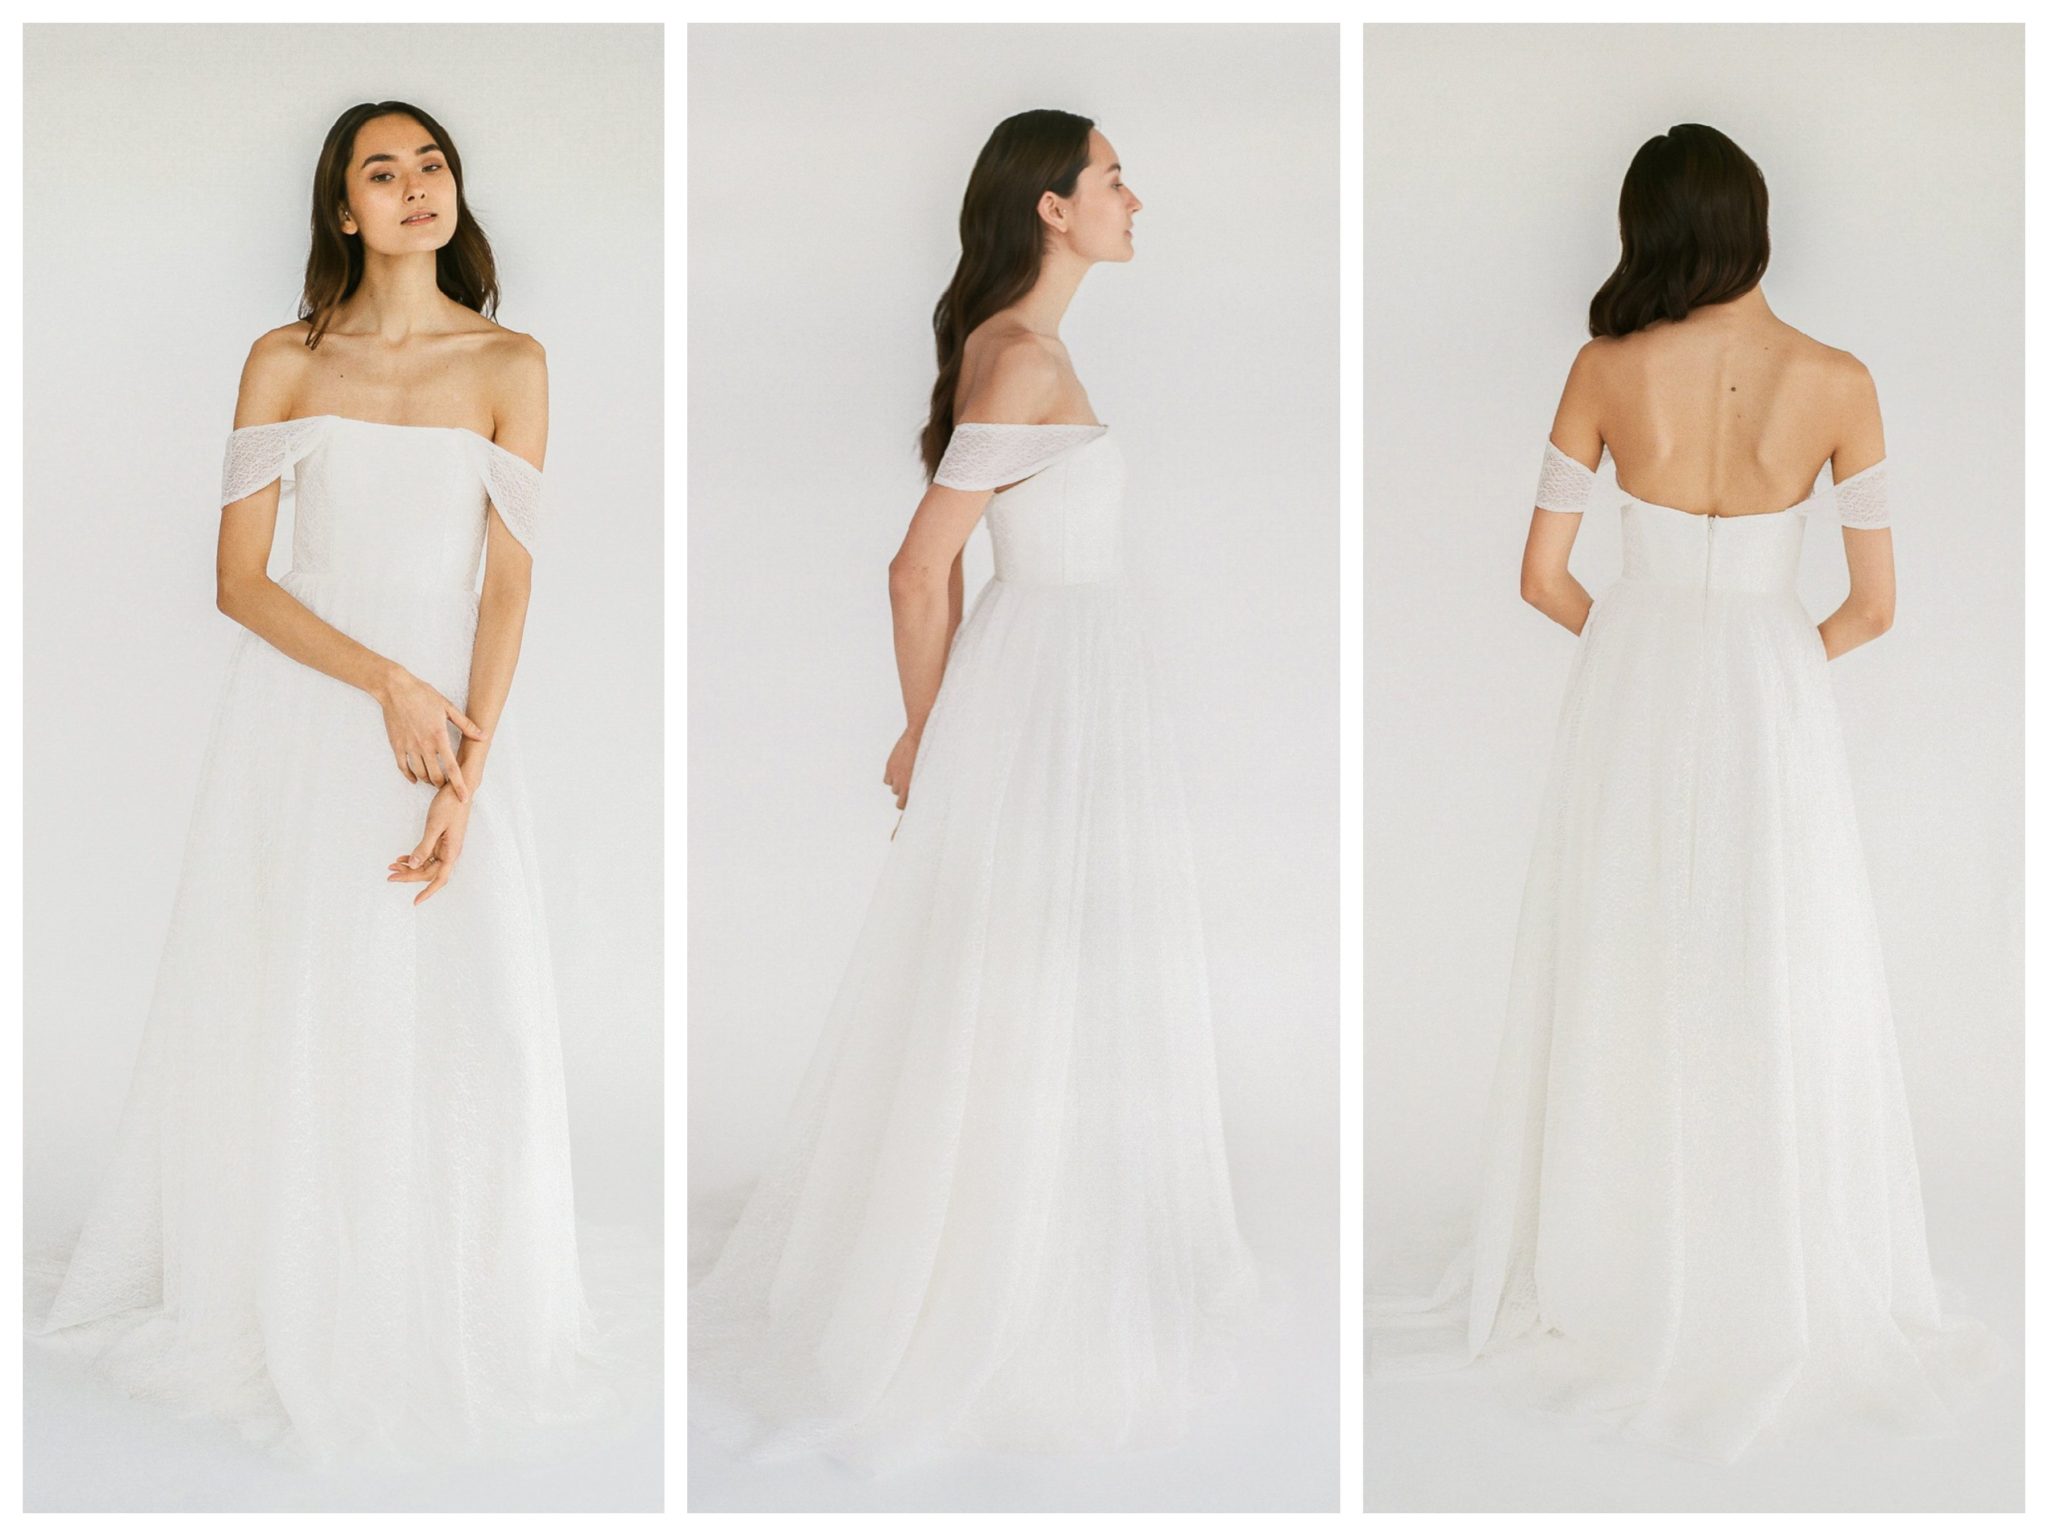 Wedding dresses for broad shoulders by top Los Angeles bridal shop, Love and Lace Bridal Salon: Truvelle Bridal's Vanessa